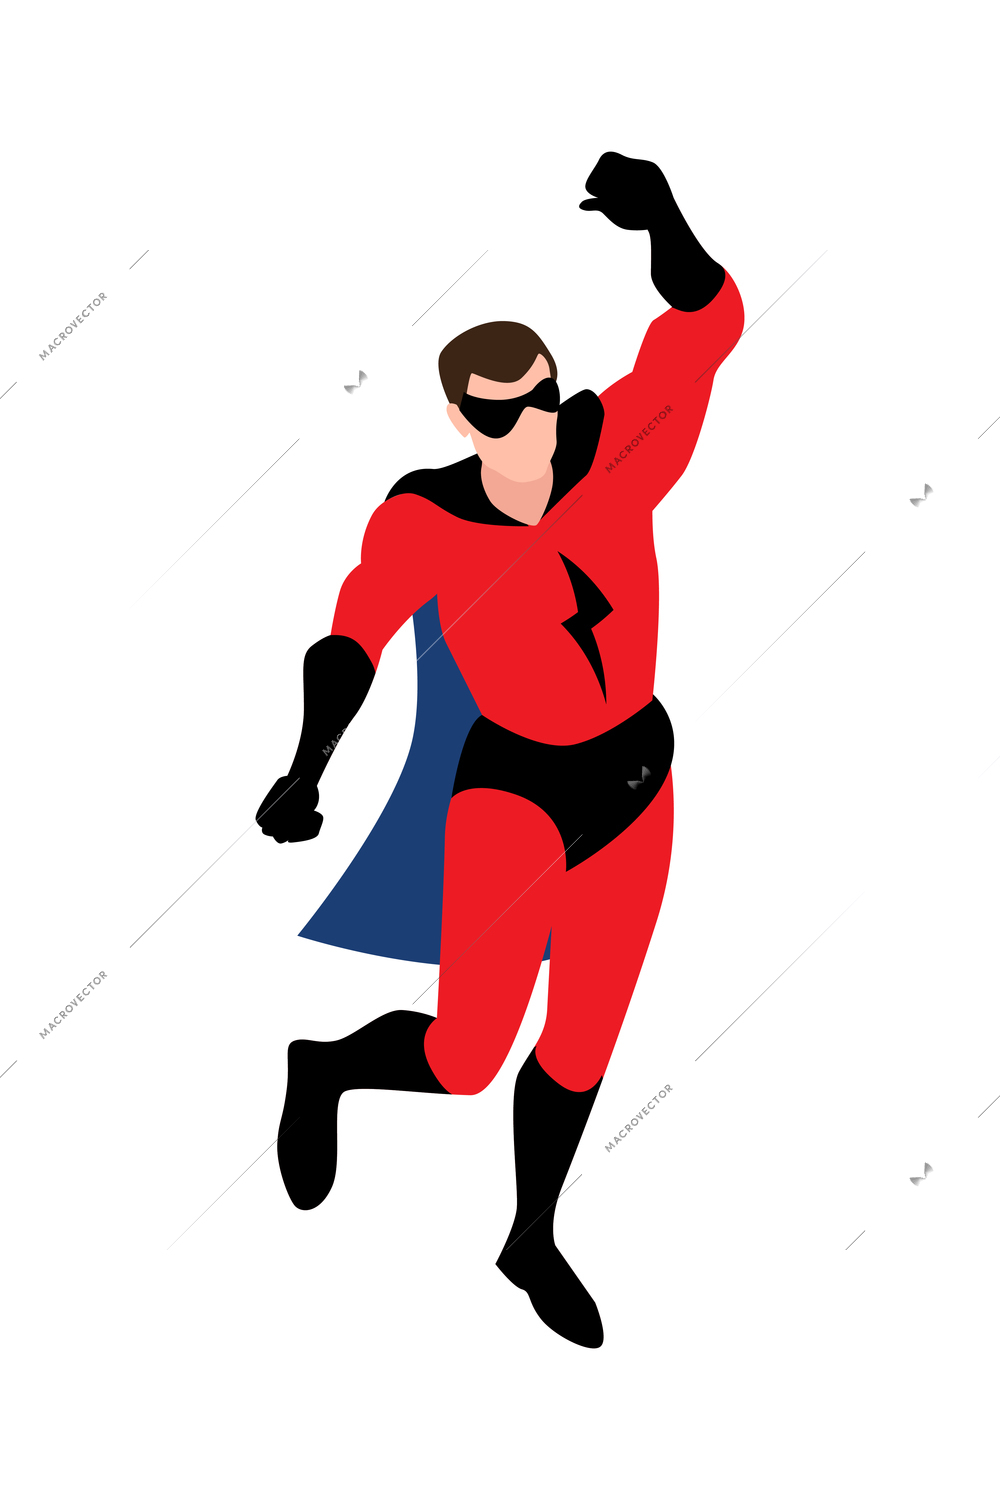 Isometric clipart with man in superhero costume at party 3d vector illustration